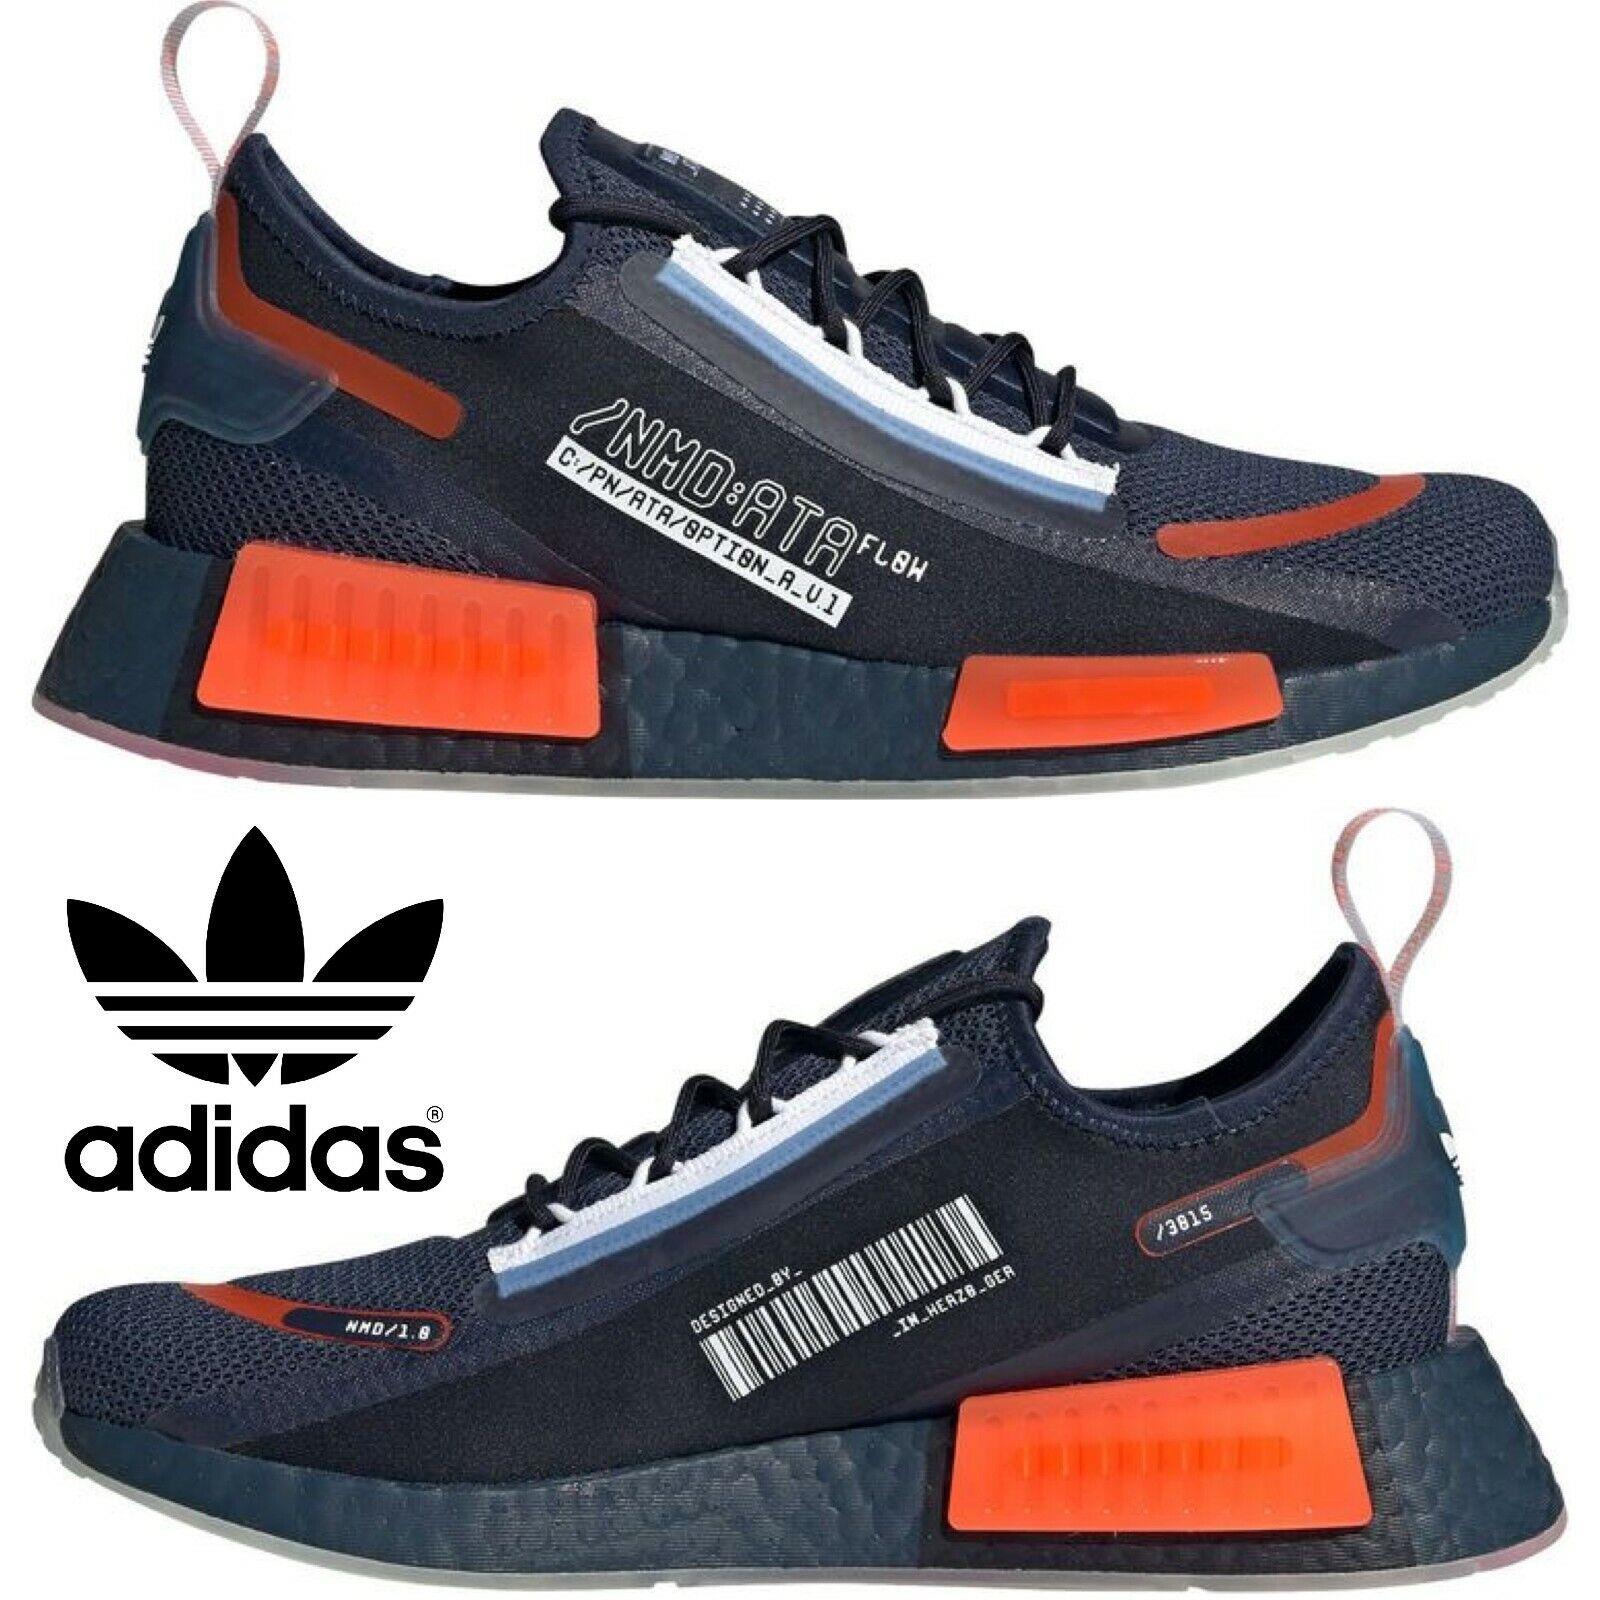 Adidas Originals Nmd R1 Men`s Sneakers Running Shoes Gym Casual Sport Navy - Blue , NAVY/RED Manufacturer